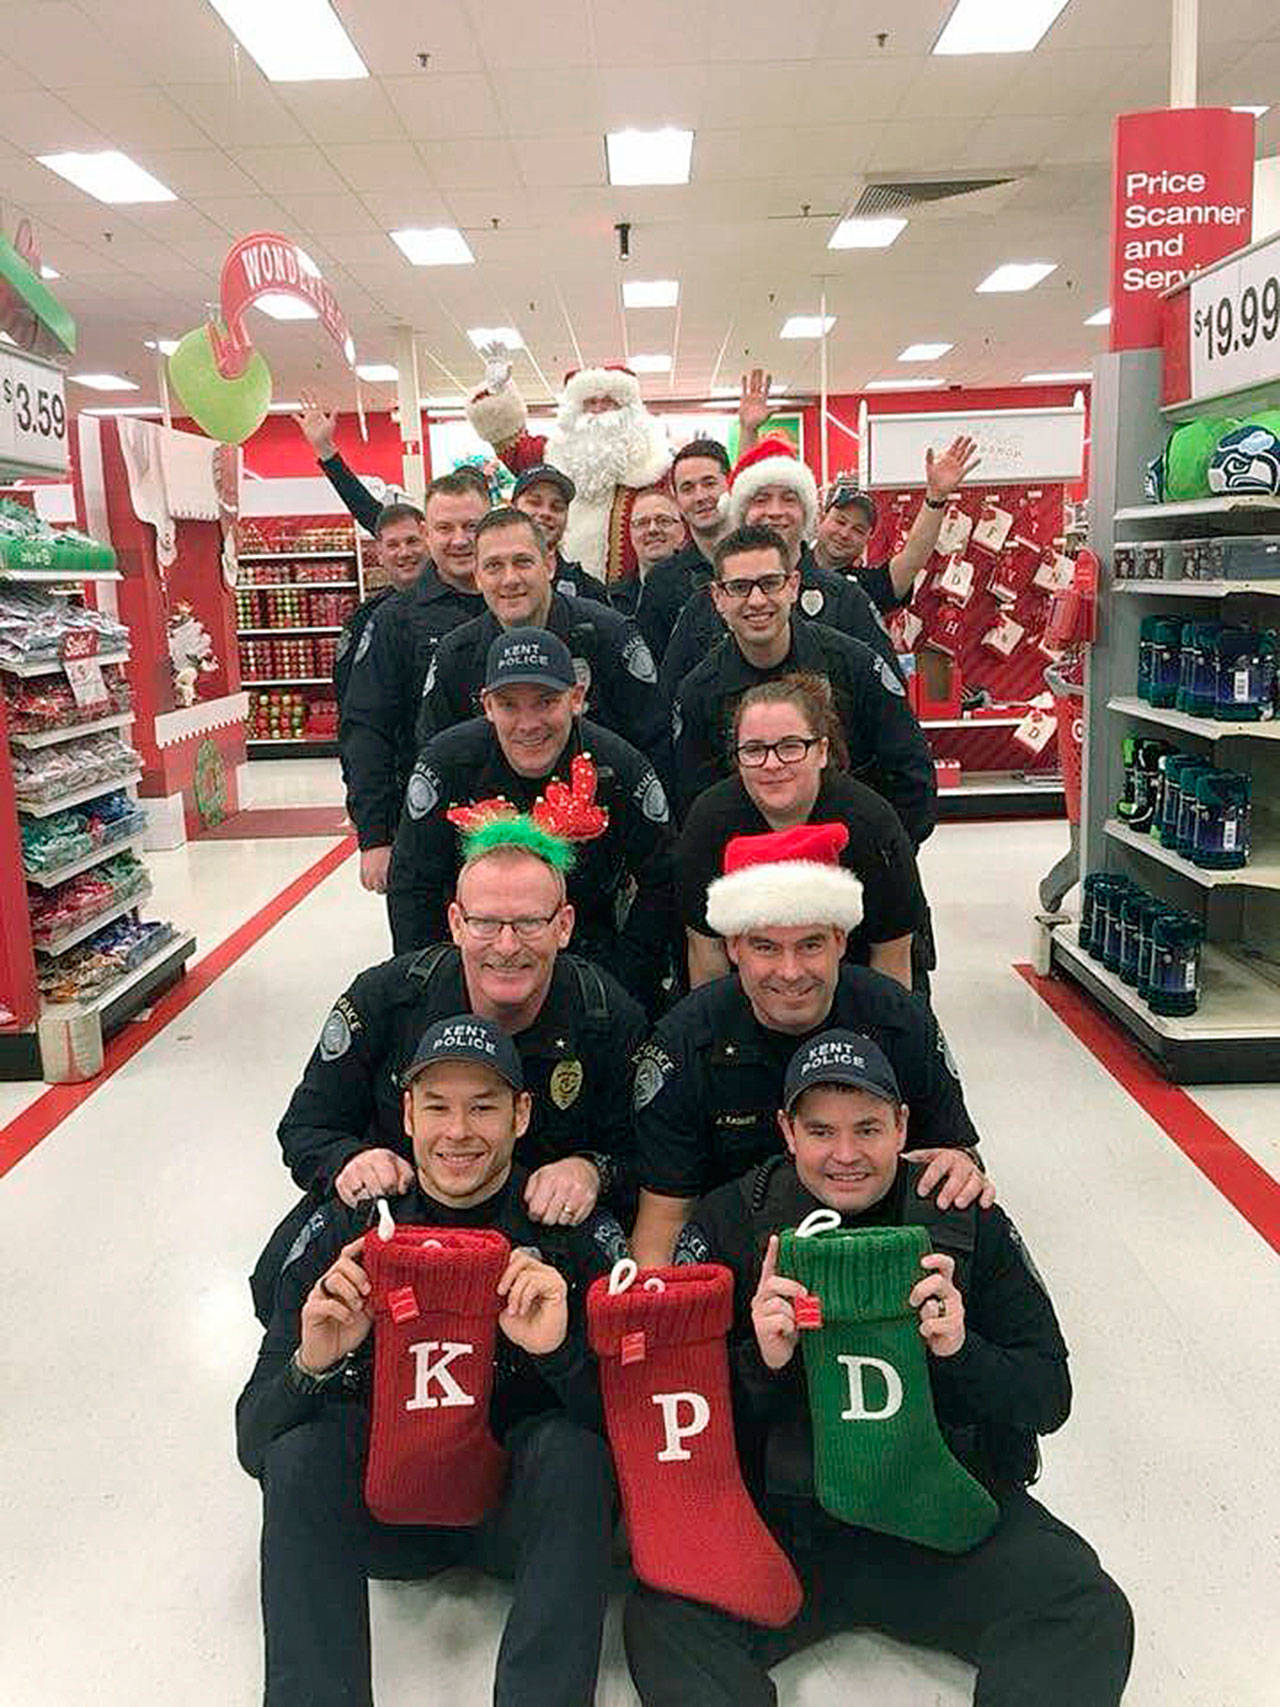 Kent Police officers and staff participated in Target’s Heroes & Helpers program on Saturday to help children purchase gifts for their families. COURTESY PHOTO, Kent Police